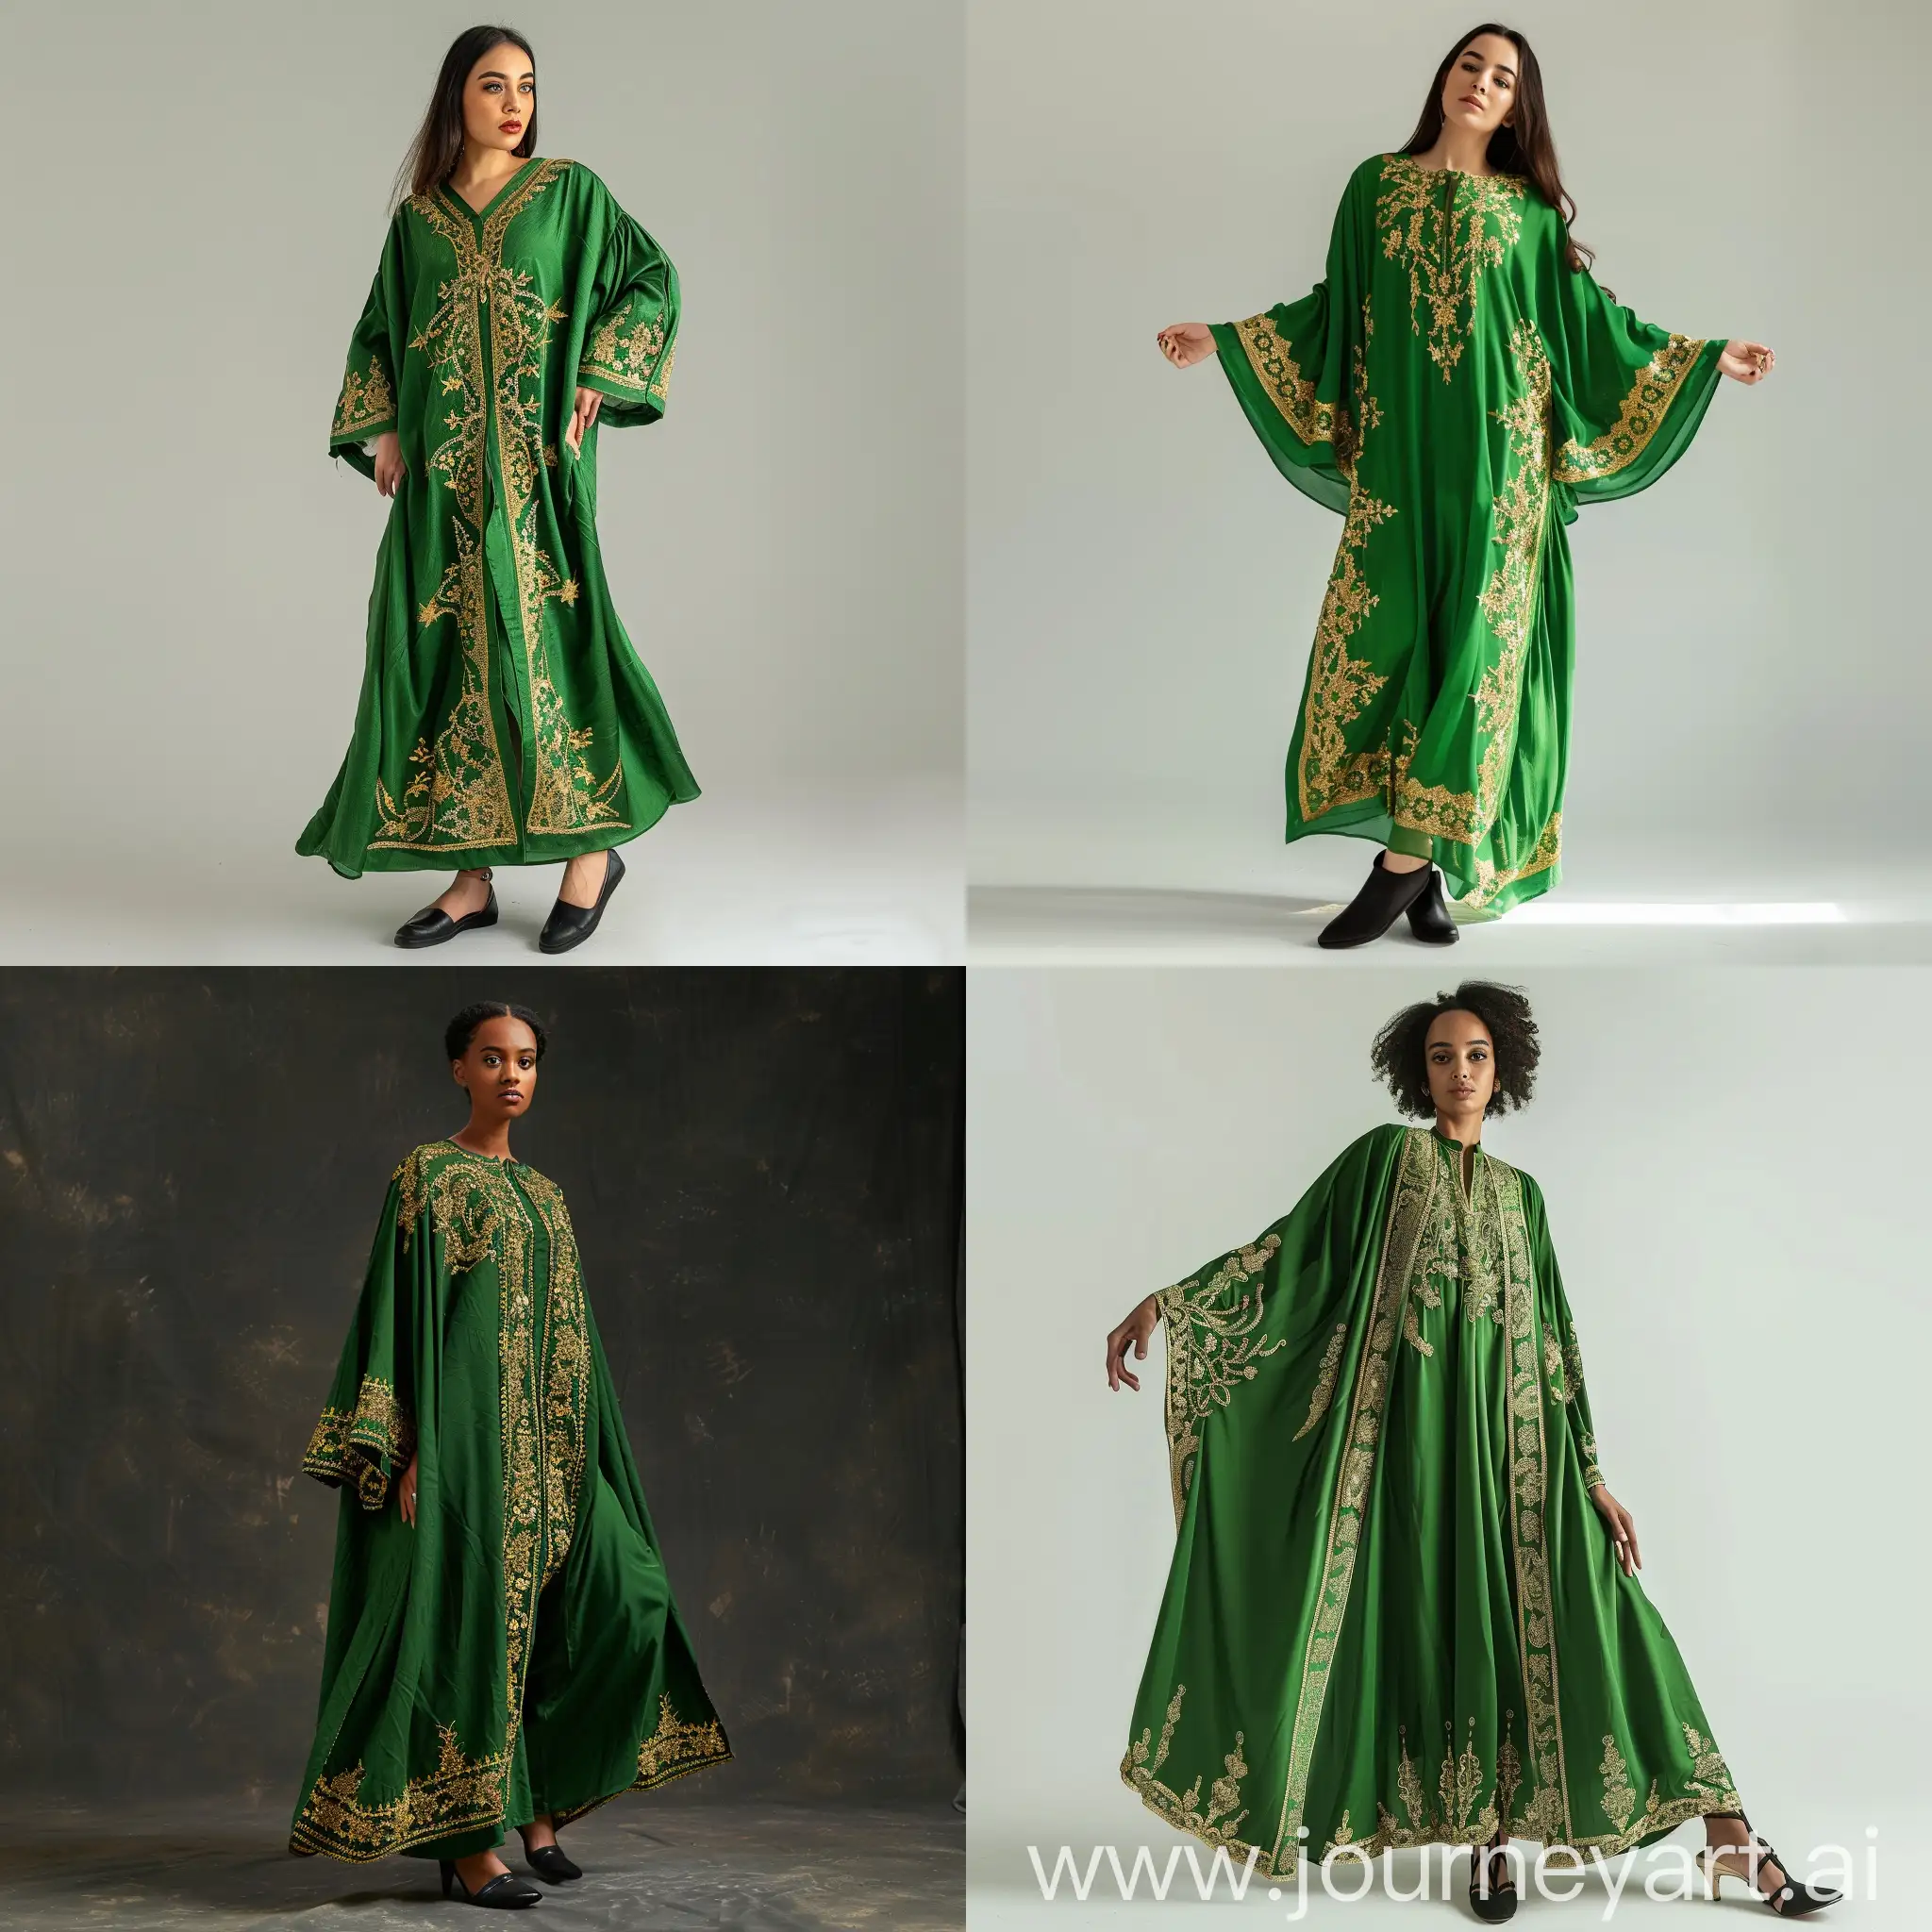 make image, a 30 years old woman wear a green Caftan with golden embroidery, and black shoe, artistic pose